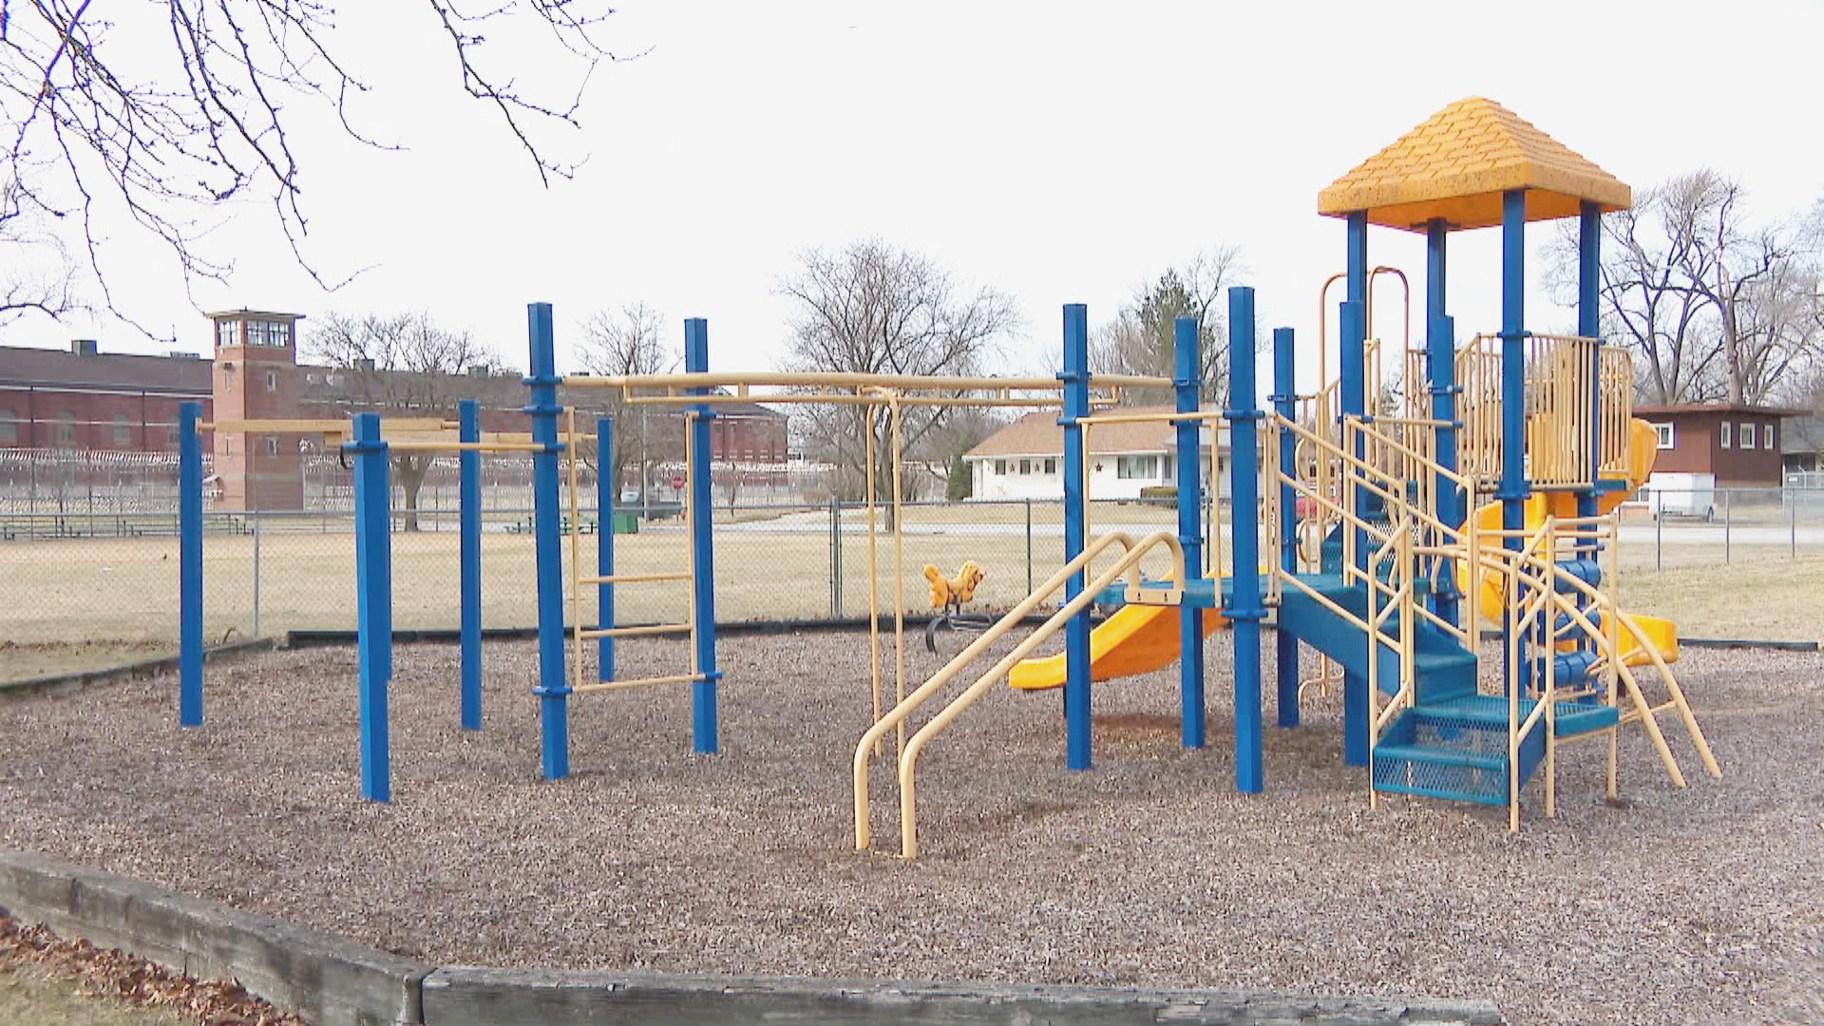 A park and playground in Pontiac, Illinois, sit outside the Pontiac Correctional Center’s fences. (WTTW News)